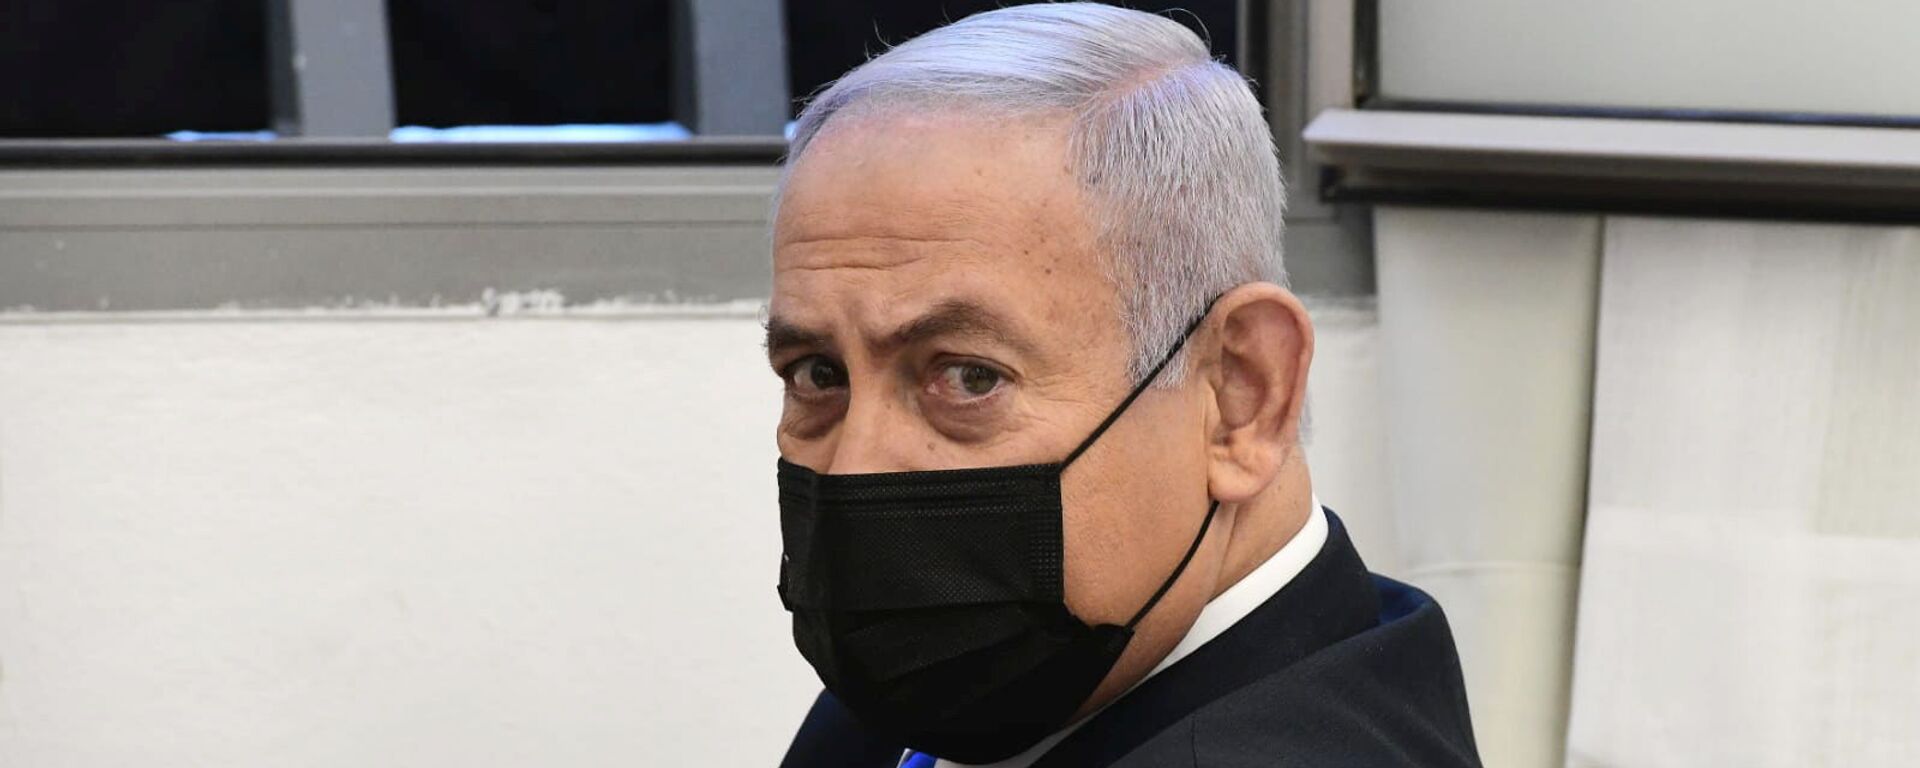 Israeli Prime Minister Benjamin Netanyahu looks on before the start of a hearing in his corruption trial at Jerusalem's District Court February 8, 2021. - Sputnik International, 1920, 08.02.2021